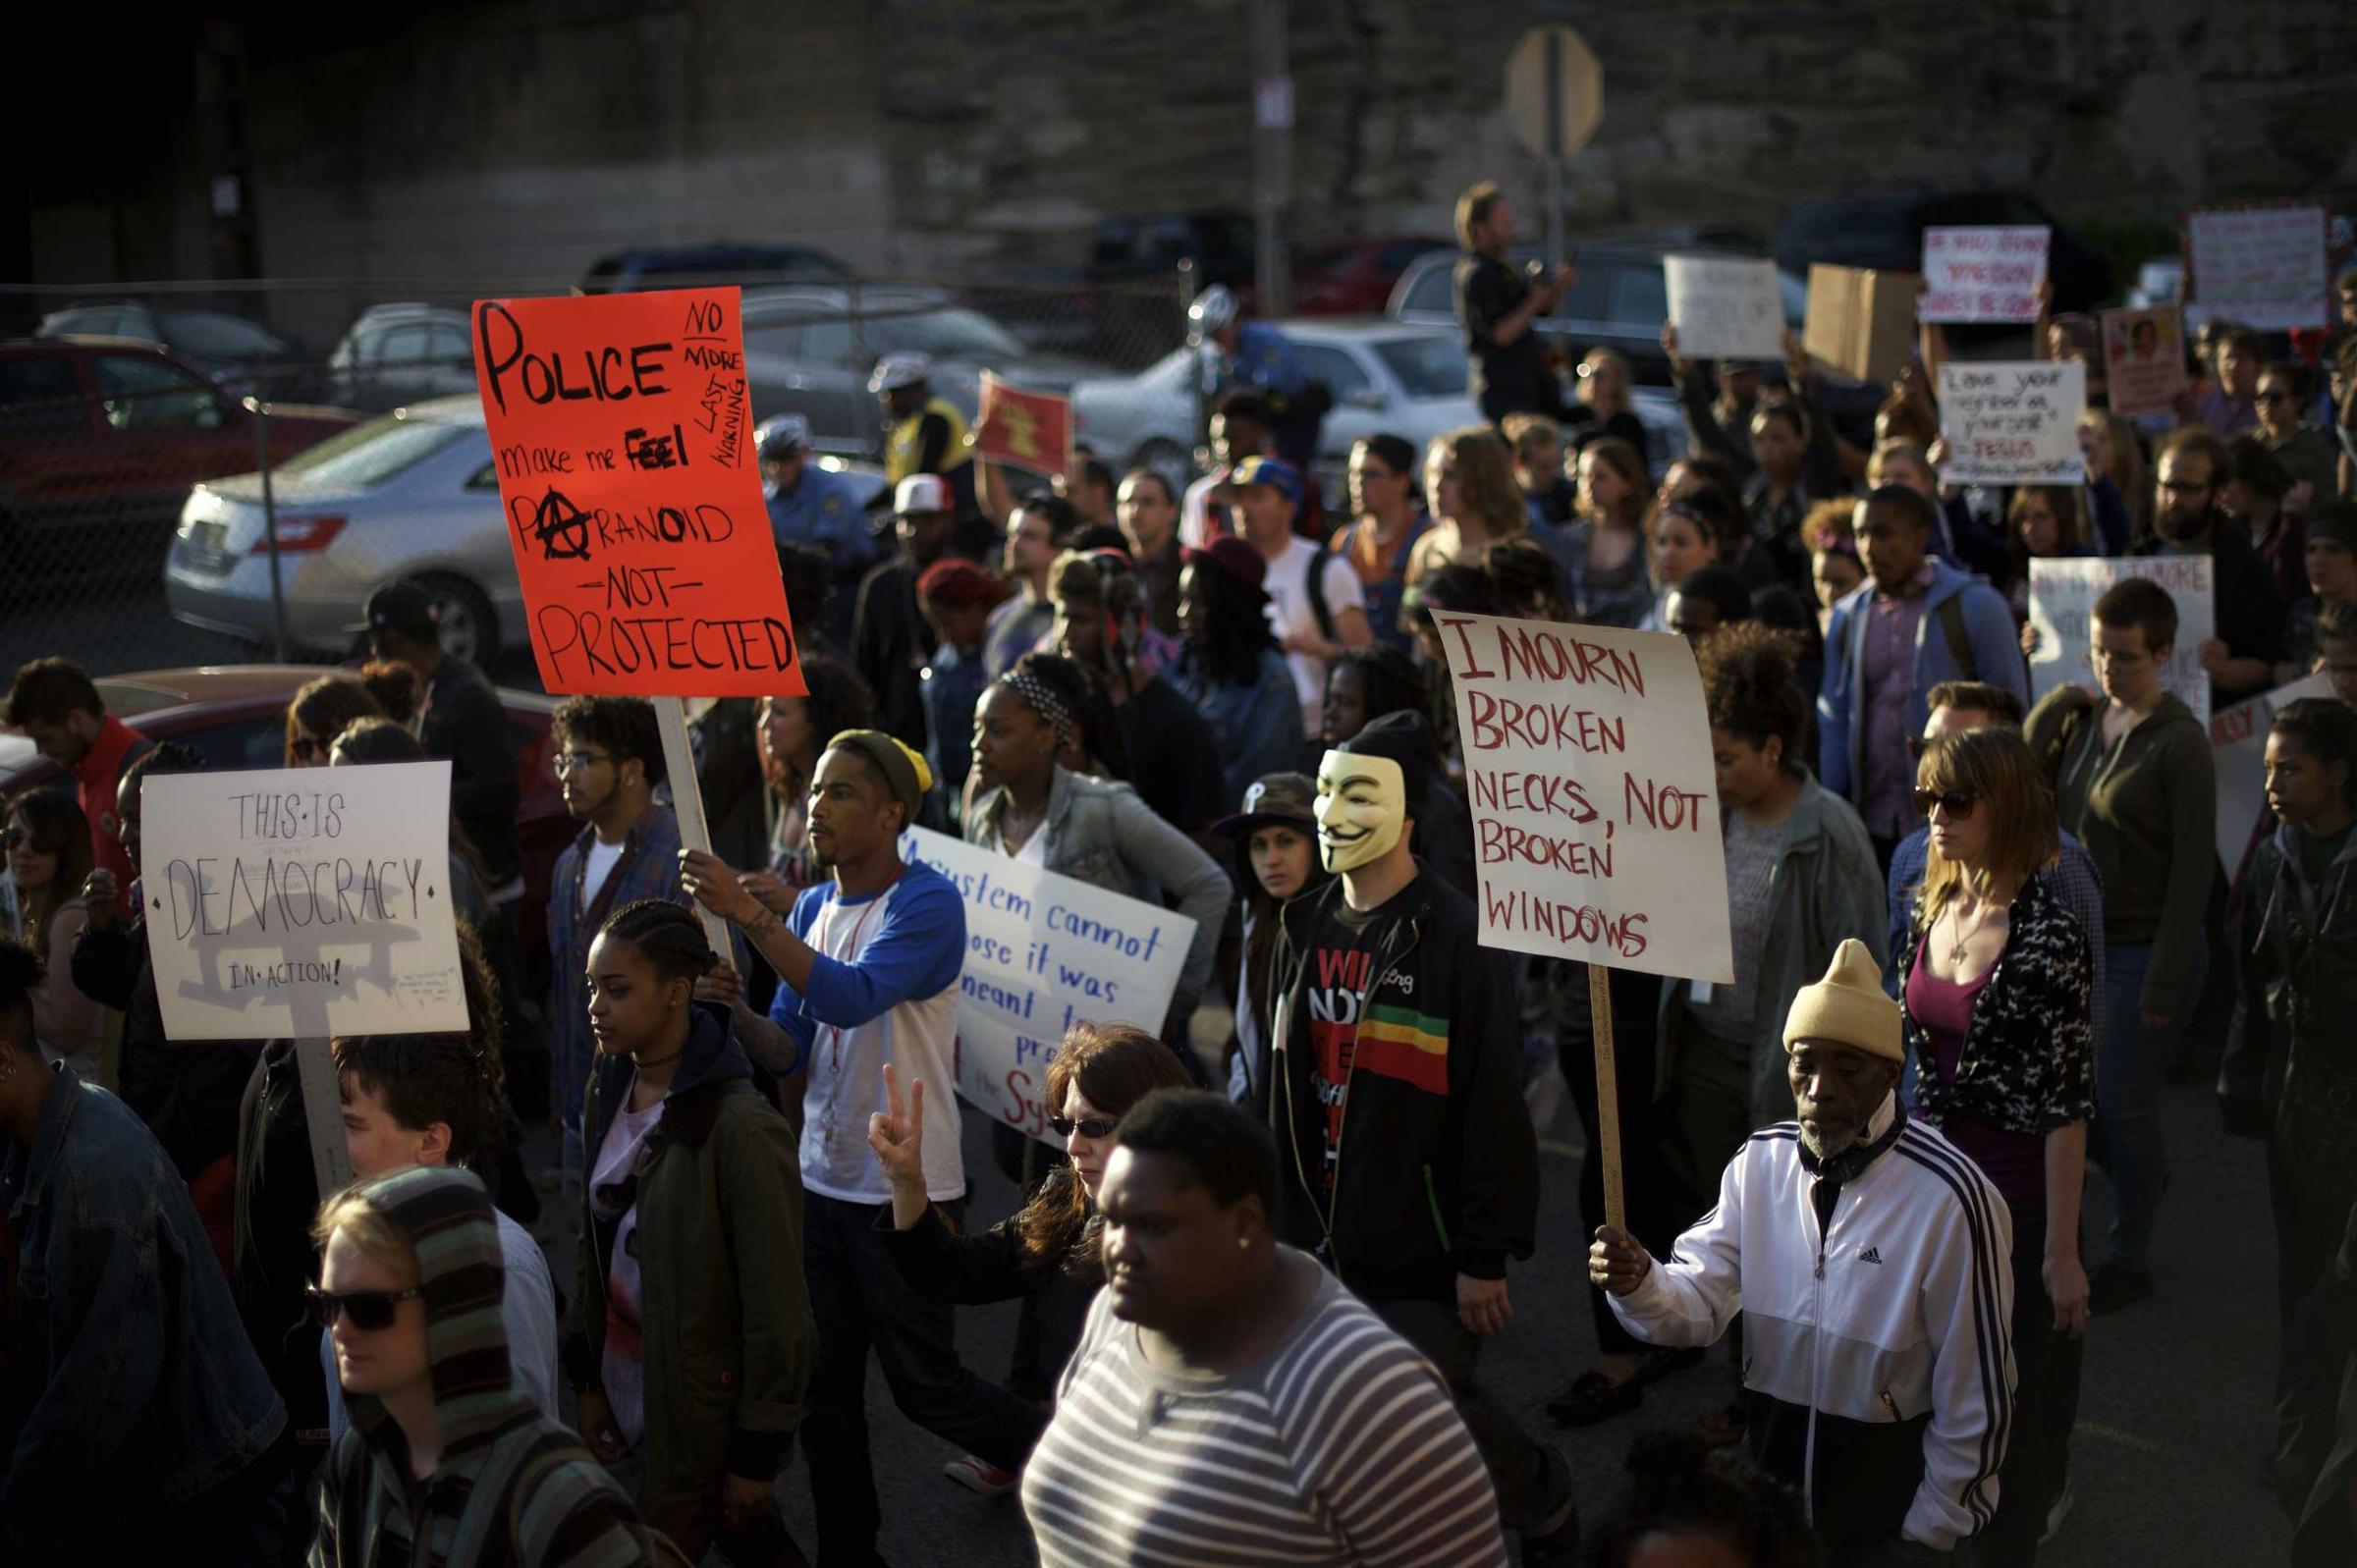 Demonstrators march to protest the death of Freddie Gray, in Philadelphia on April 30, 2015.